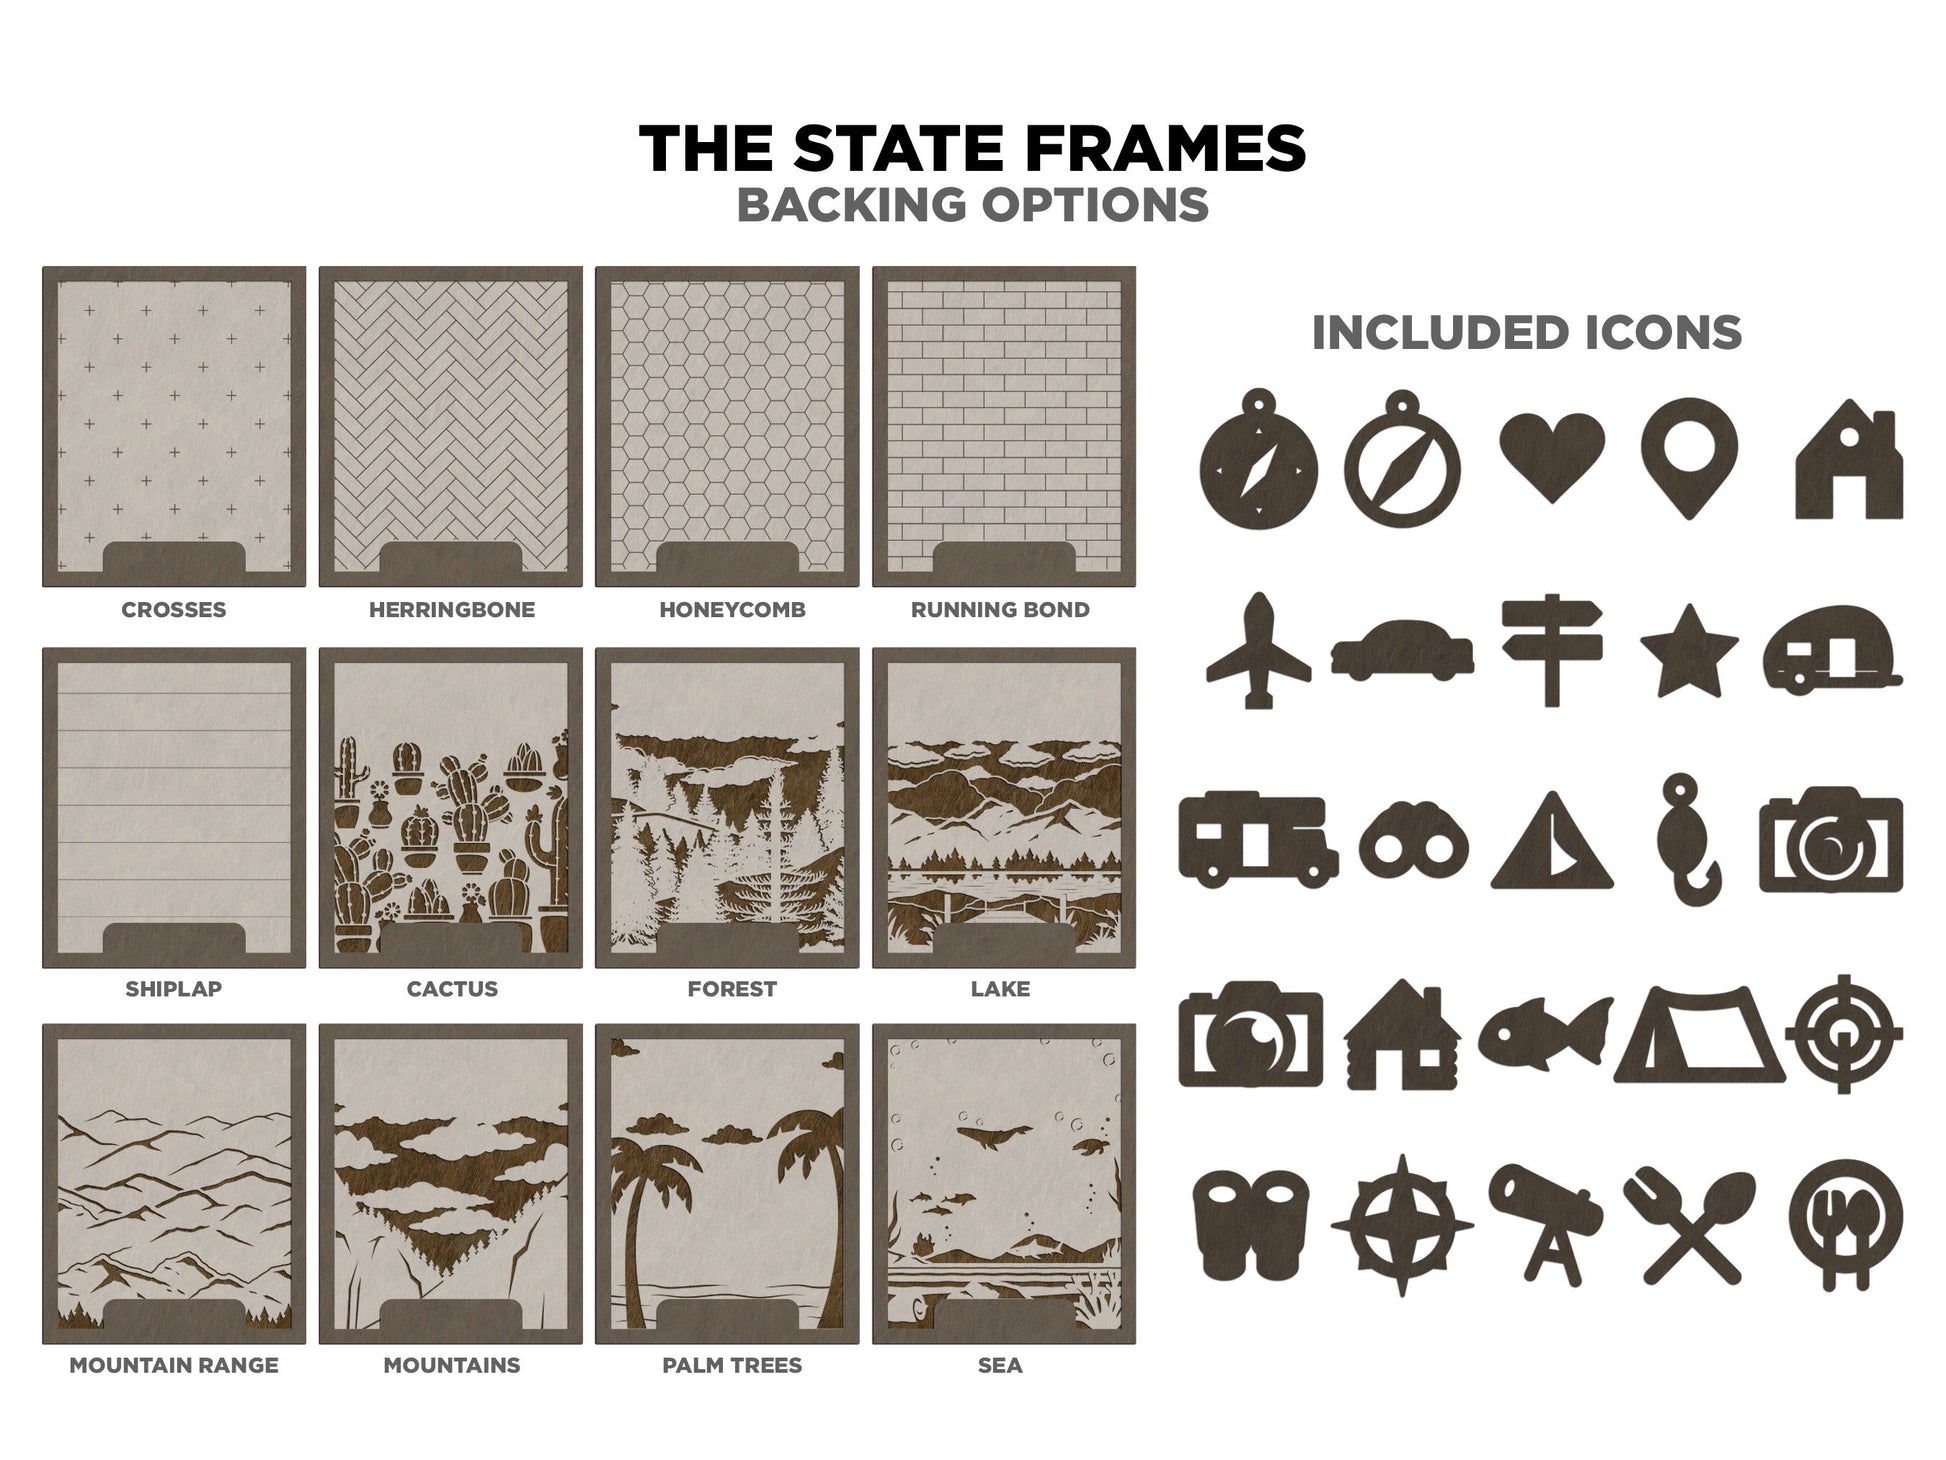 The Colorado State Frame - 13 text options, 12 backgrounds, 25 icons Included - Make over 7,500 designs - Glowforge & Lightburn Tested